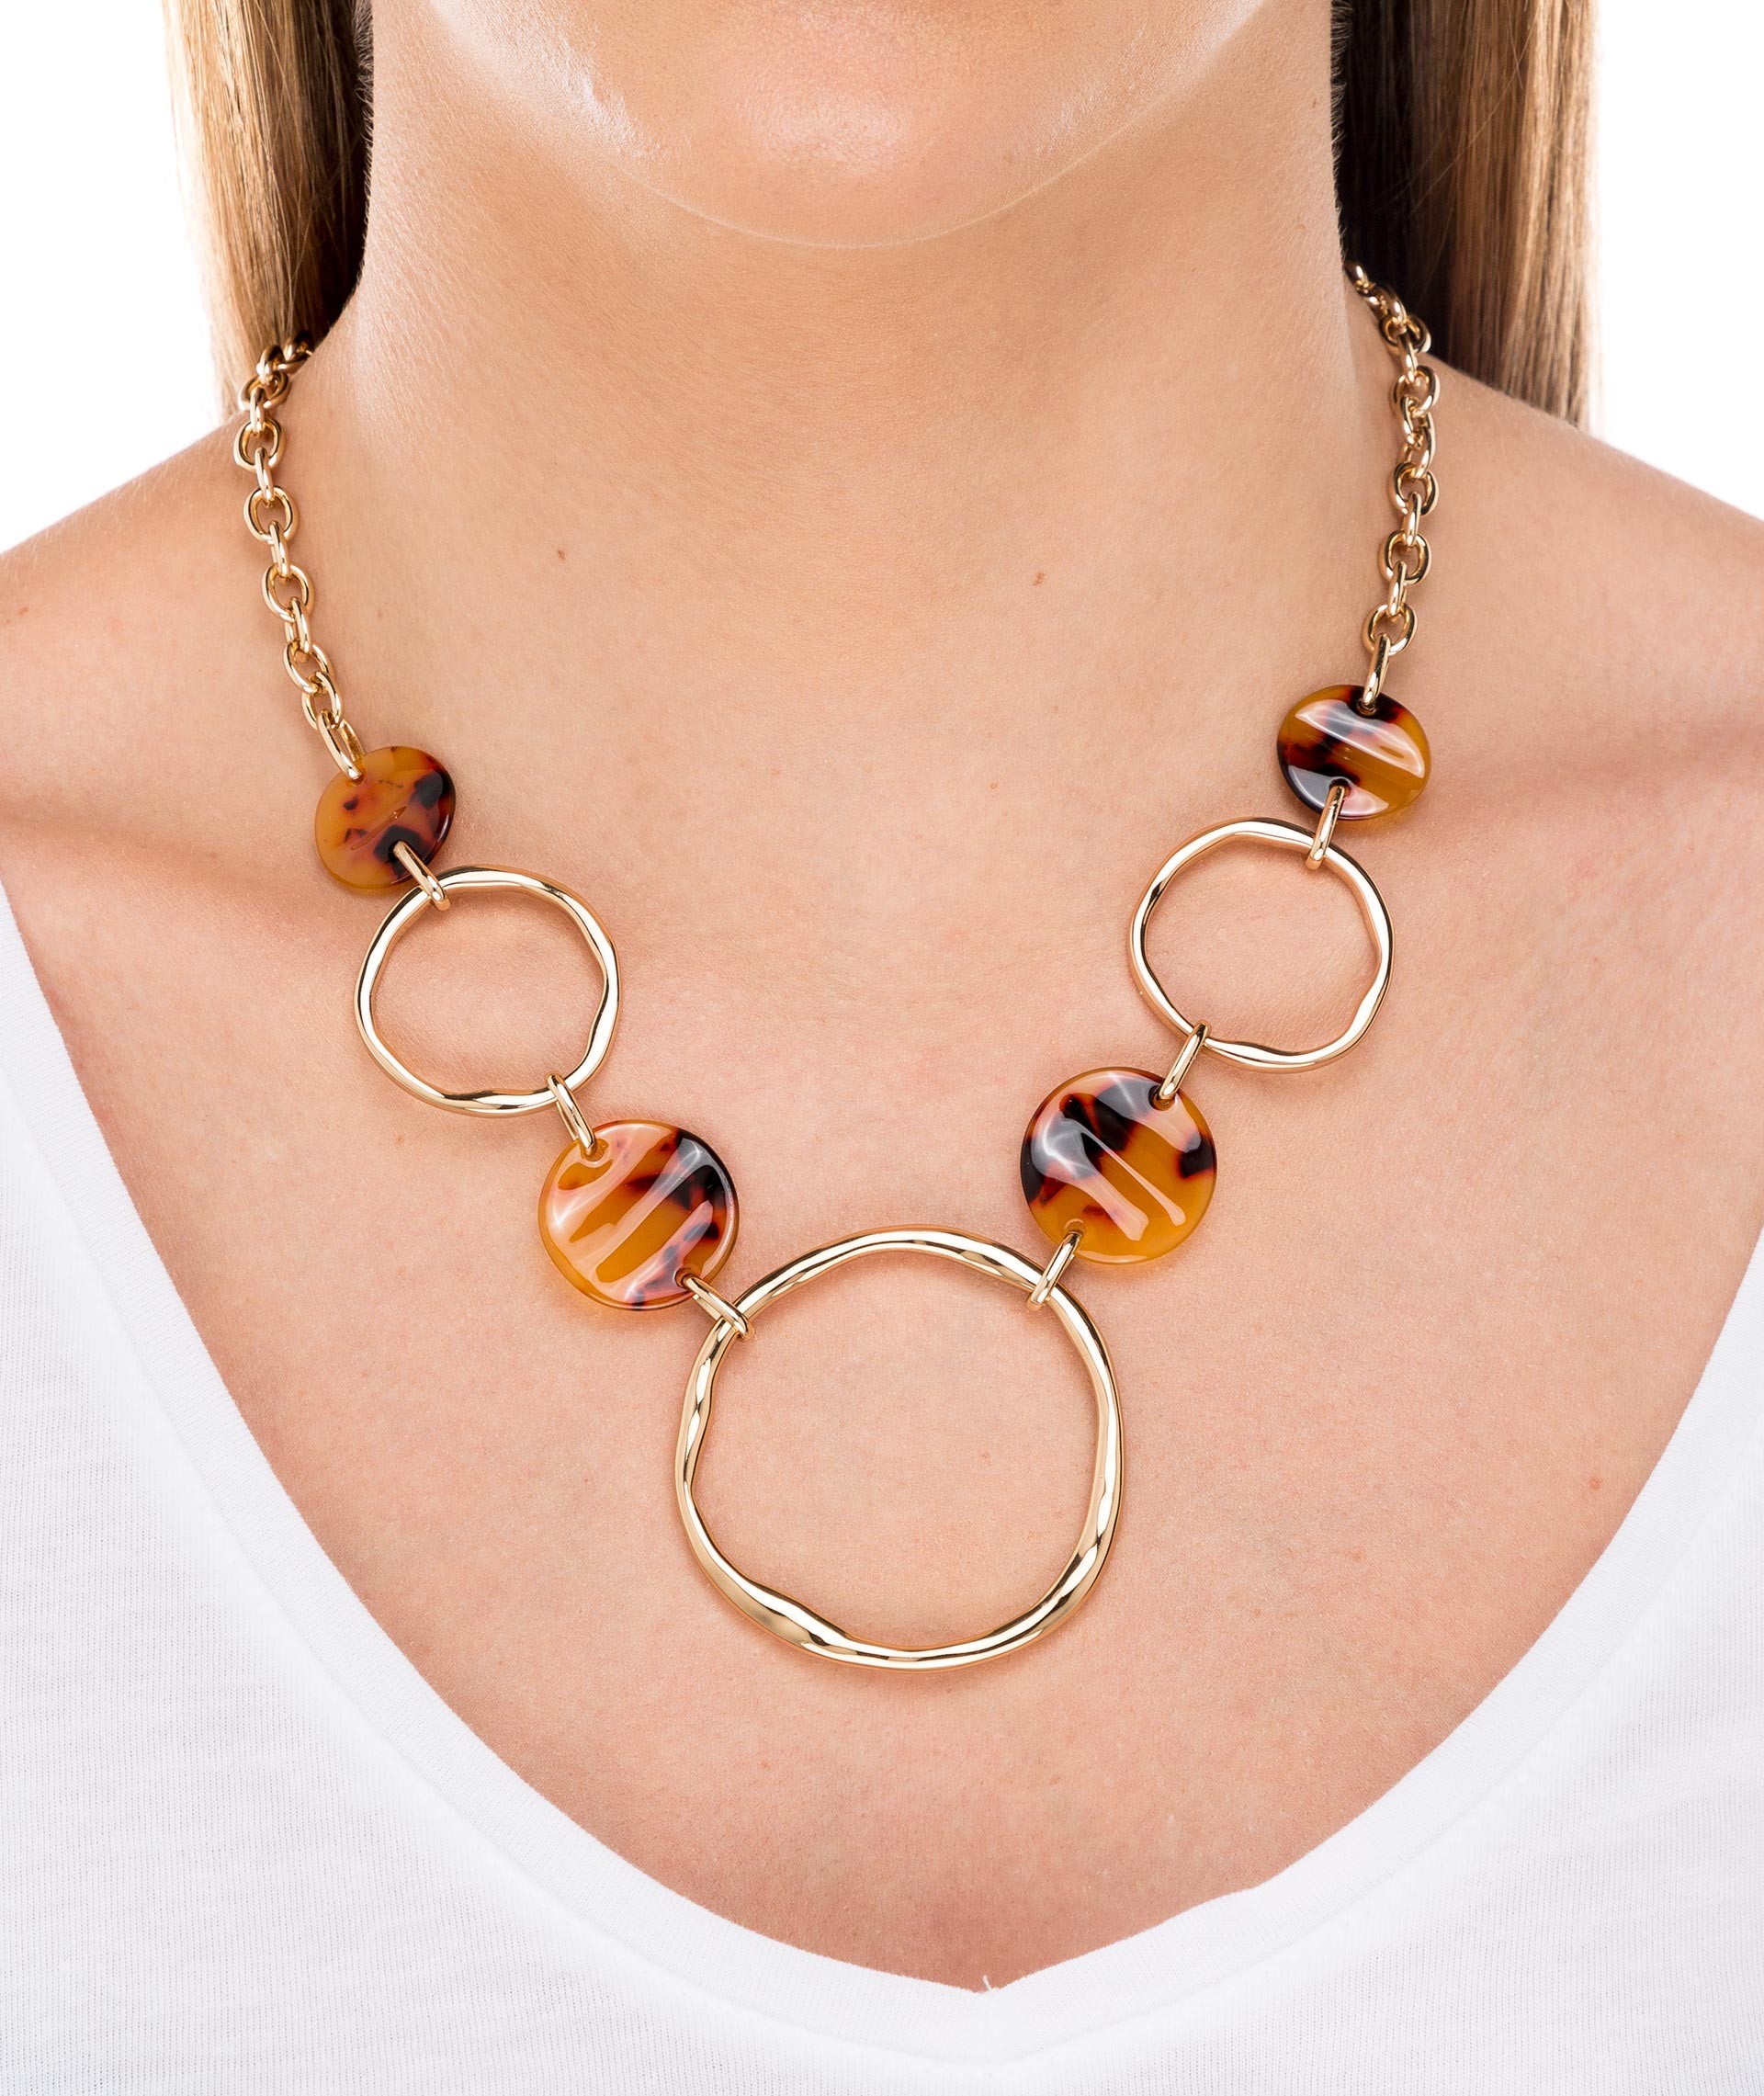 Necklace Hoops Acetate